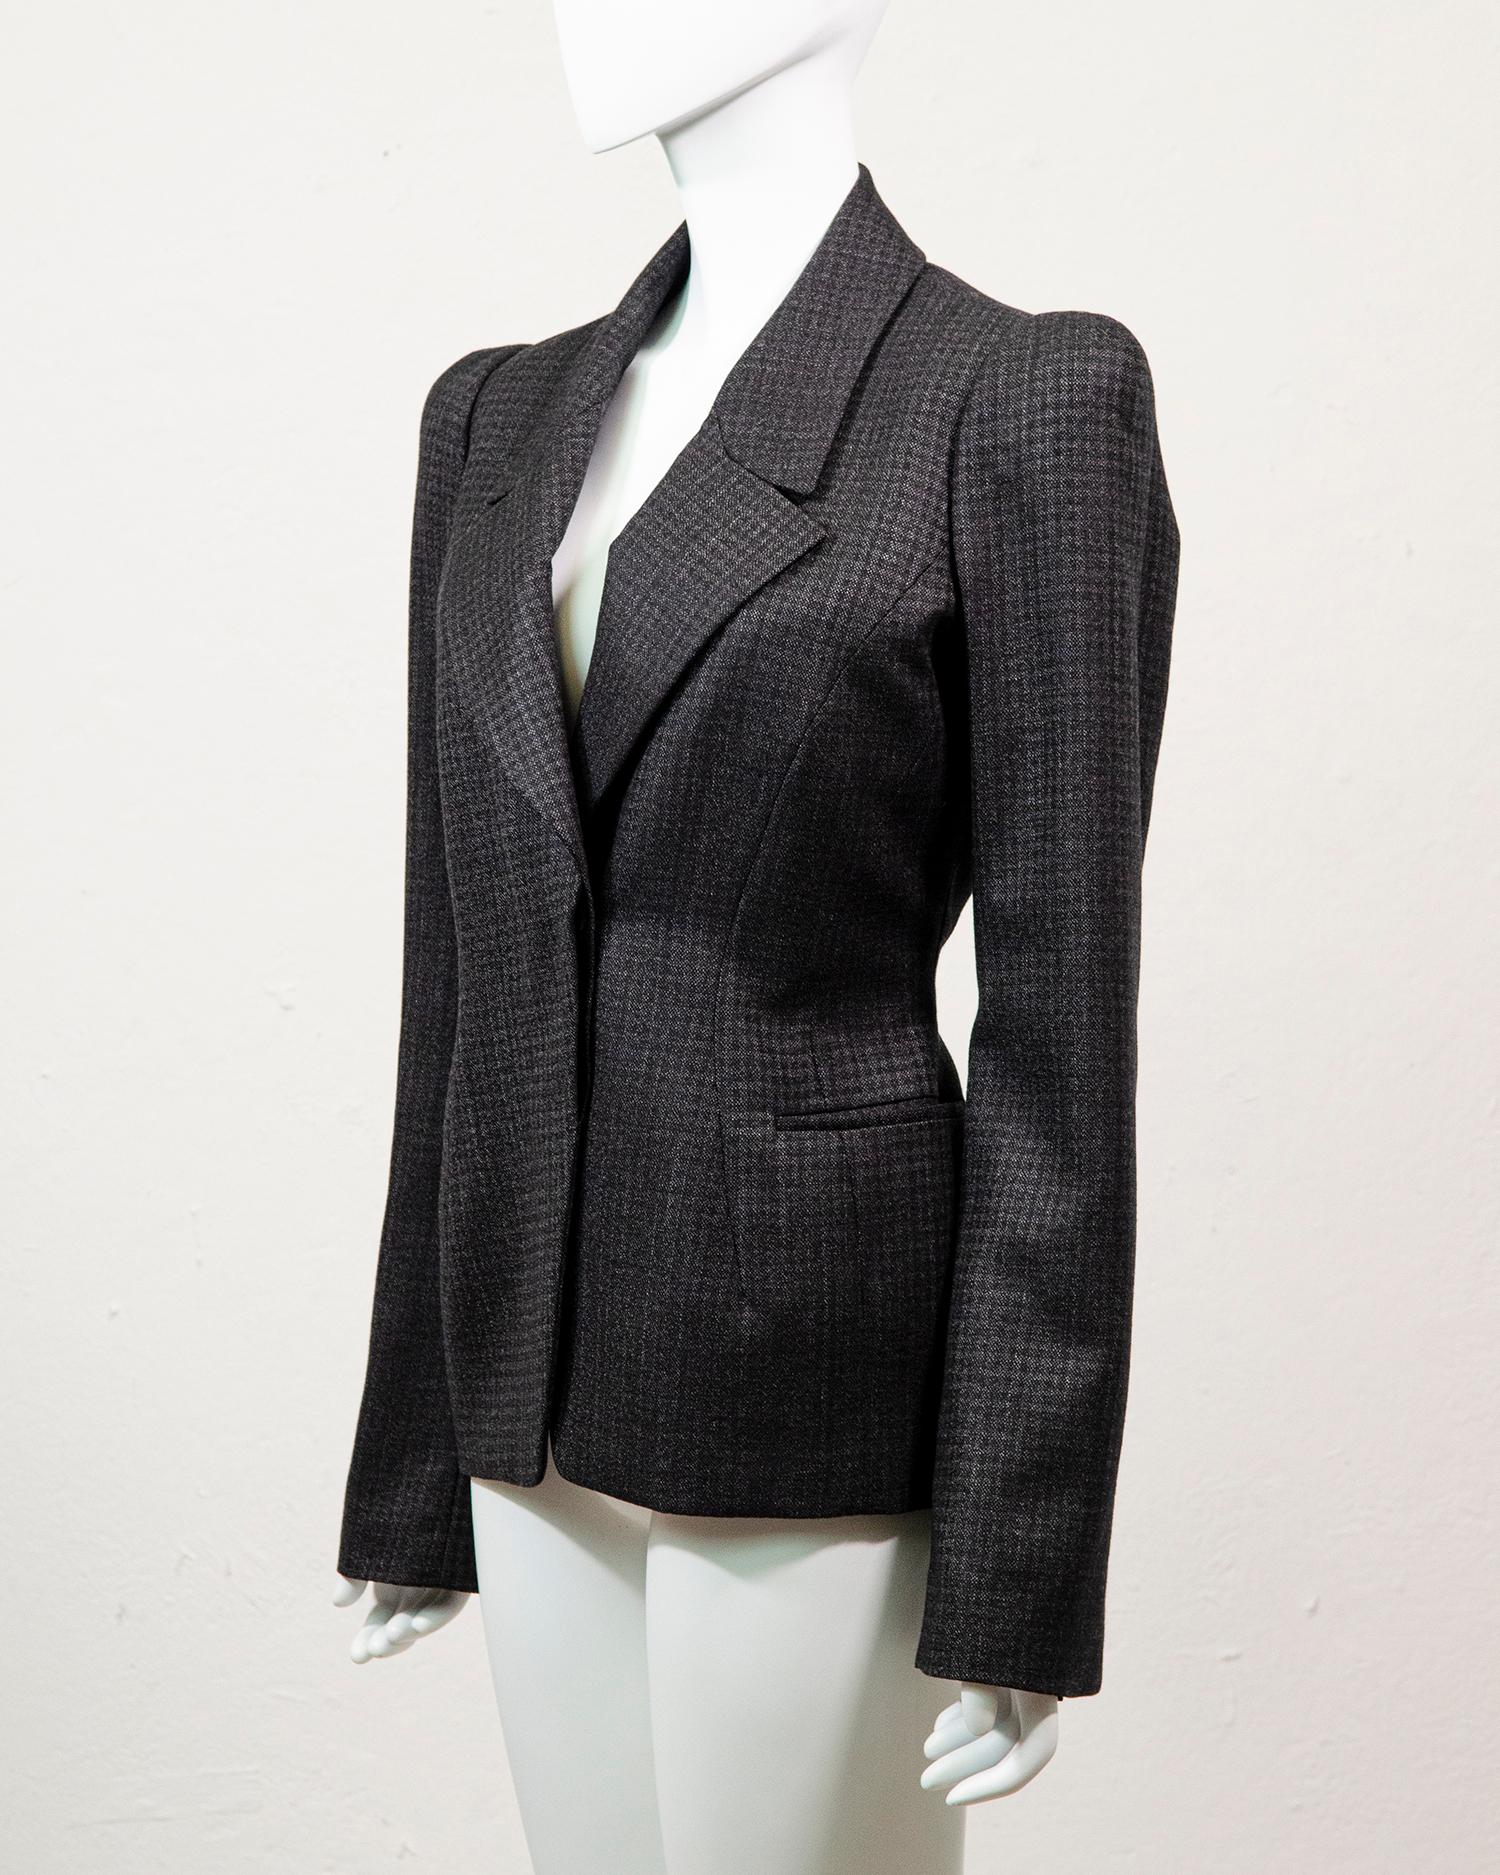 Gorgeous elegant and classic wool blazer by Tom Ford <3

This blazer is tailored to perfection and features large statement shoulders, a deep V neckline and a concealed button closure. Made from a grey checked soft wool it is a perfect wardrobe